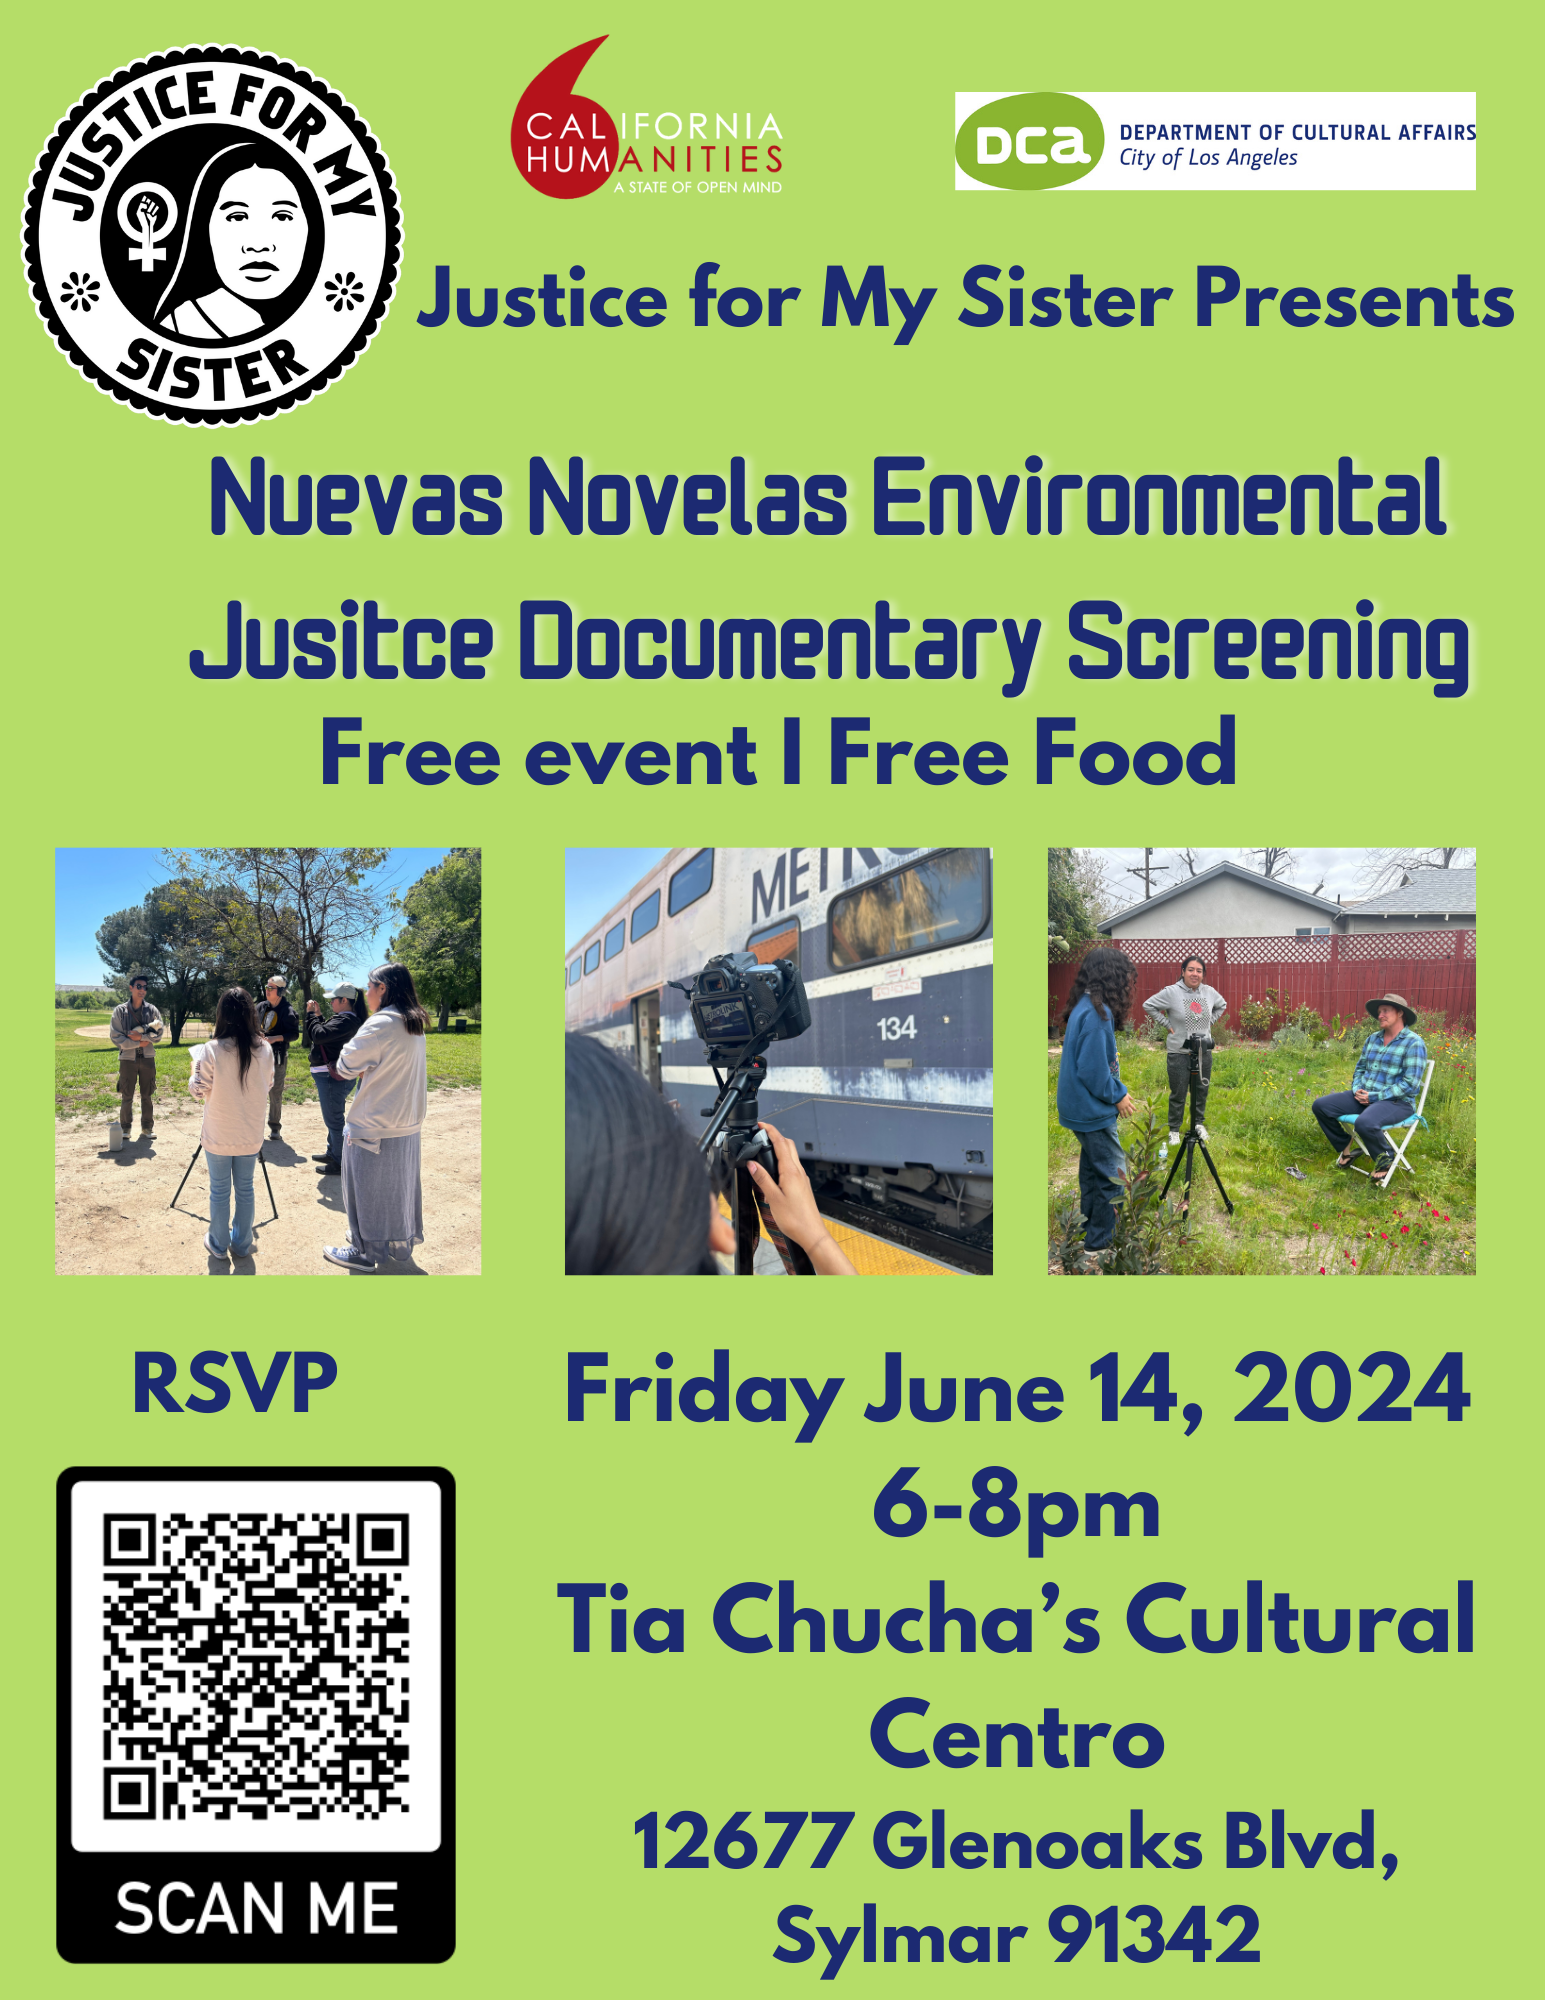 The image contains a QR code with information about an event organized by the Department of Cultural Affairs in Los Angeles. The event is a documentary screening and will take place at Tia Chucha's Cultural Centro on June 14, 2024, from 6-8pm. Participants are encouraged to RSVP for the free event that includes free food.